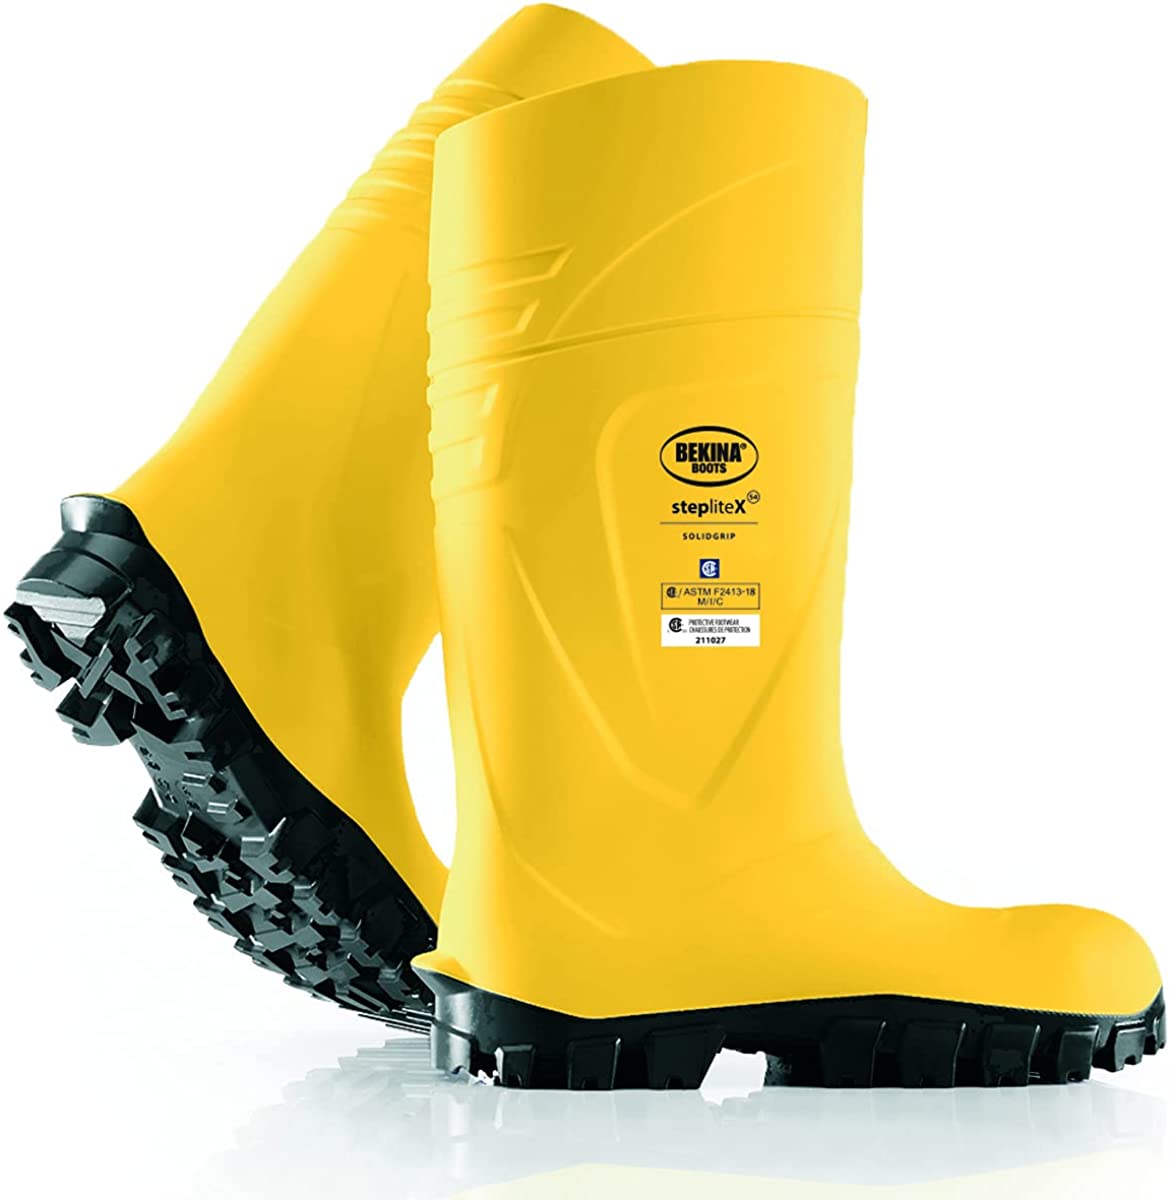 Steplitex Solidgrip S4 Metal Safety Toe Cap Work Boots in Yellow/Black from the side view